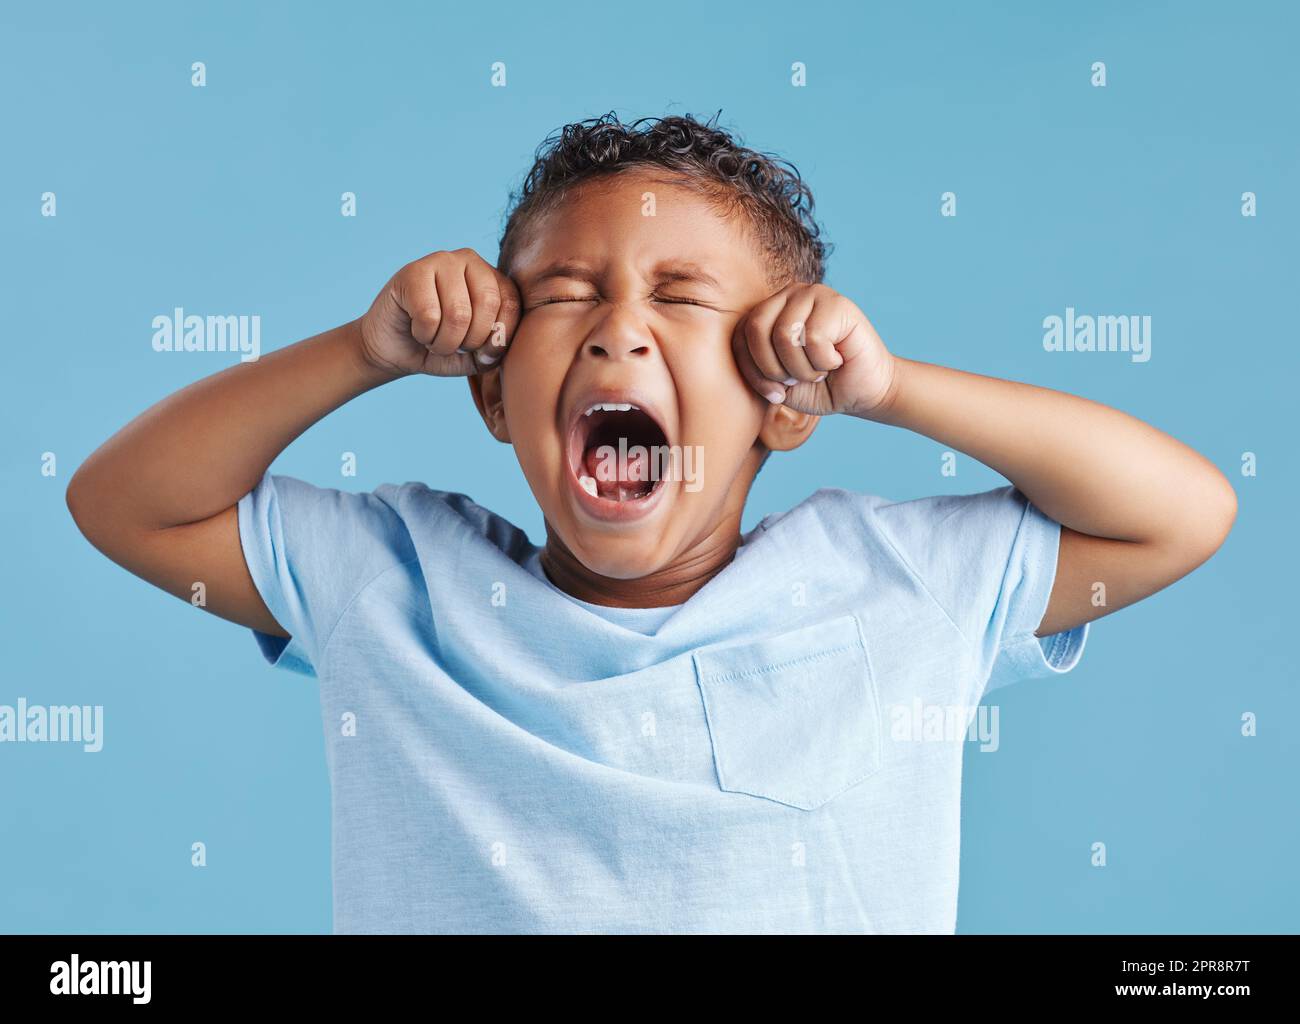 Unhappy little hispanic boy looking upset and crying while rubbing his eyes against a blue studio background. Unhappy preschooler kid bawling his eyes out Stock Photo